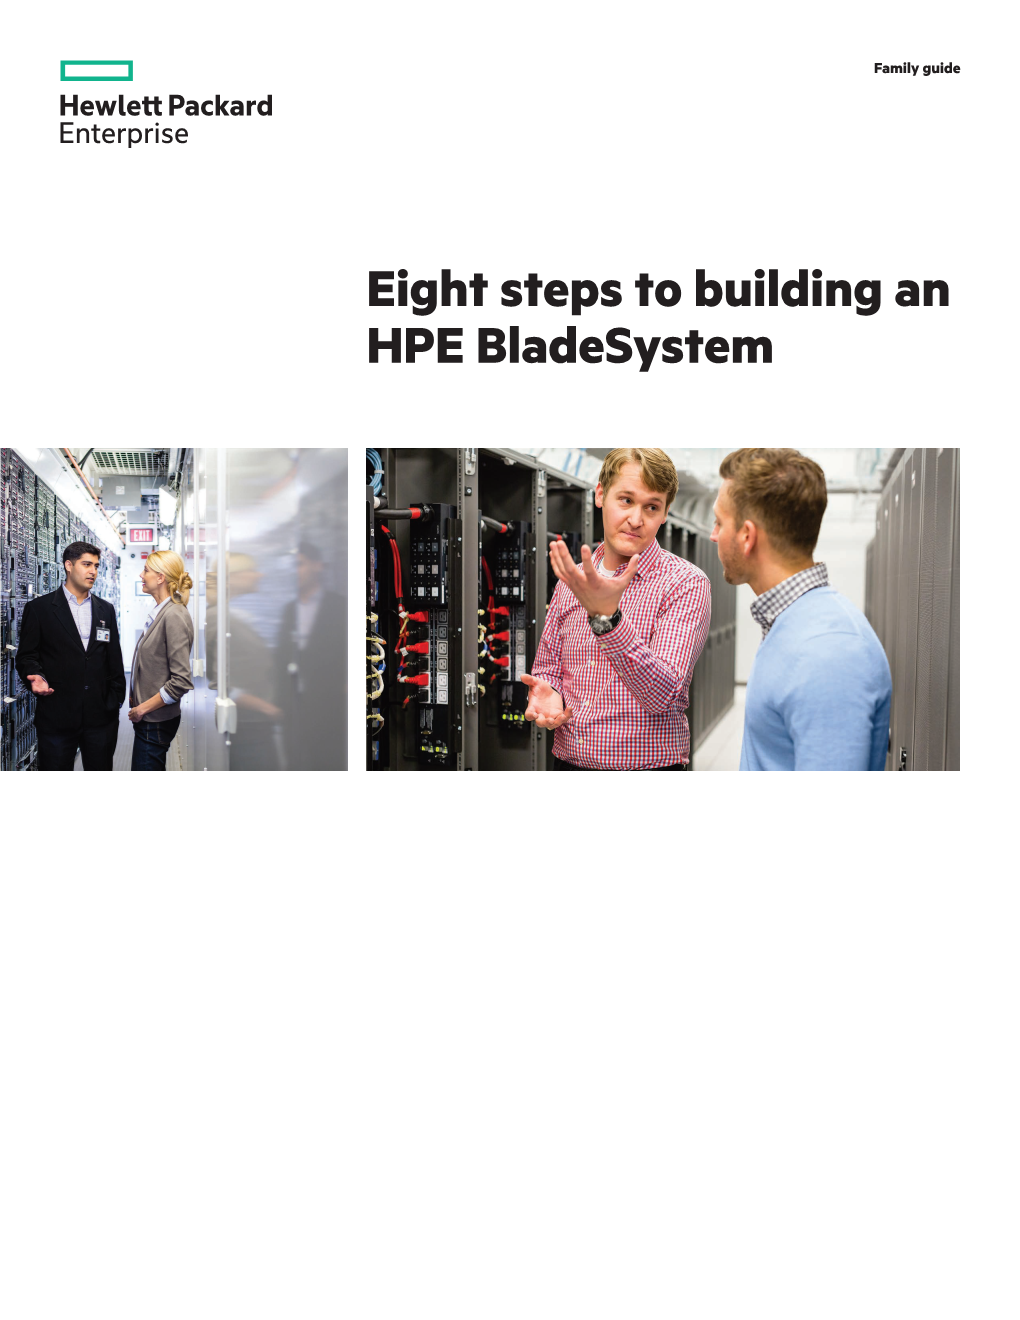 Eight Steps to Building an HPE Bladesystem Family Guide